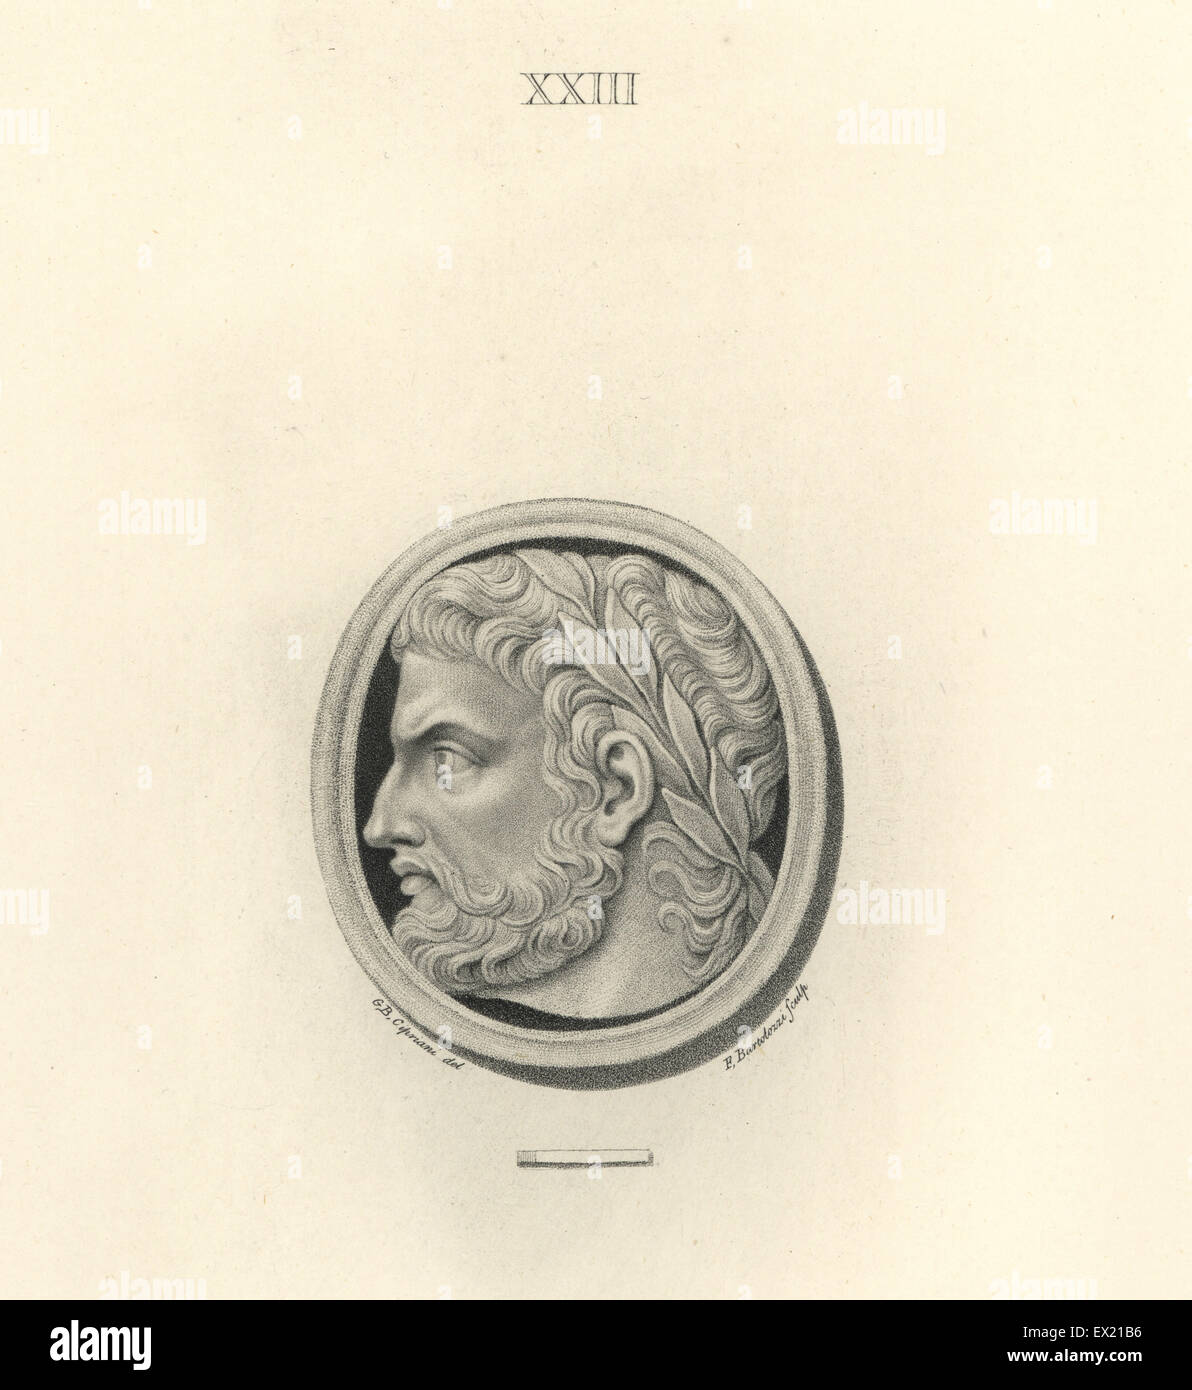 Caracalla or Roman Emperor Antoninus. Copperplate engraving by Francesco Bartolozzi after a design by Giovanni Battista Cipriani from 108 Plates of Antique Gems, 1860. The gems were from the Duke of Marlborough's collection. Stock Photo